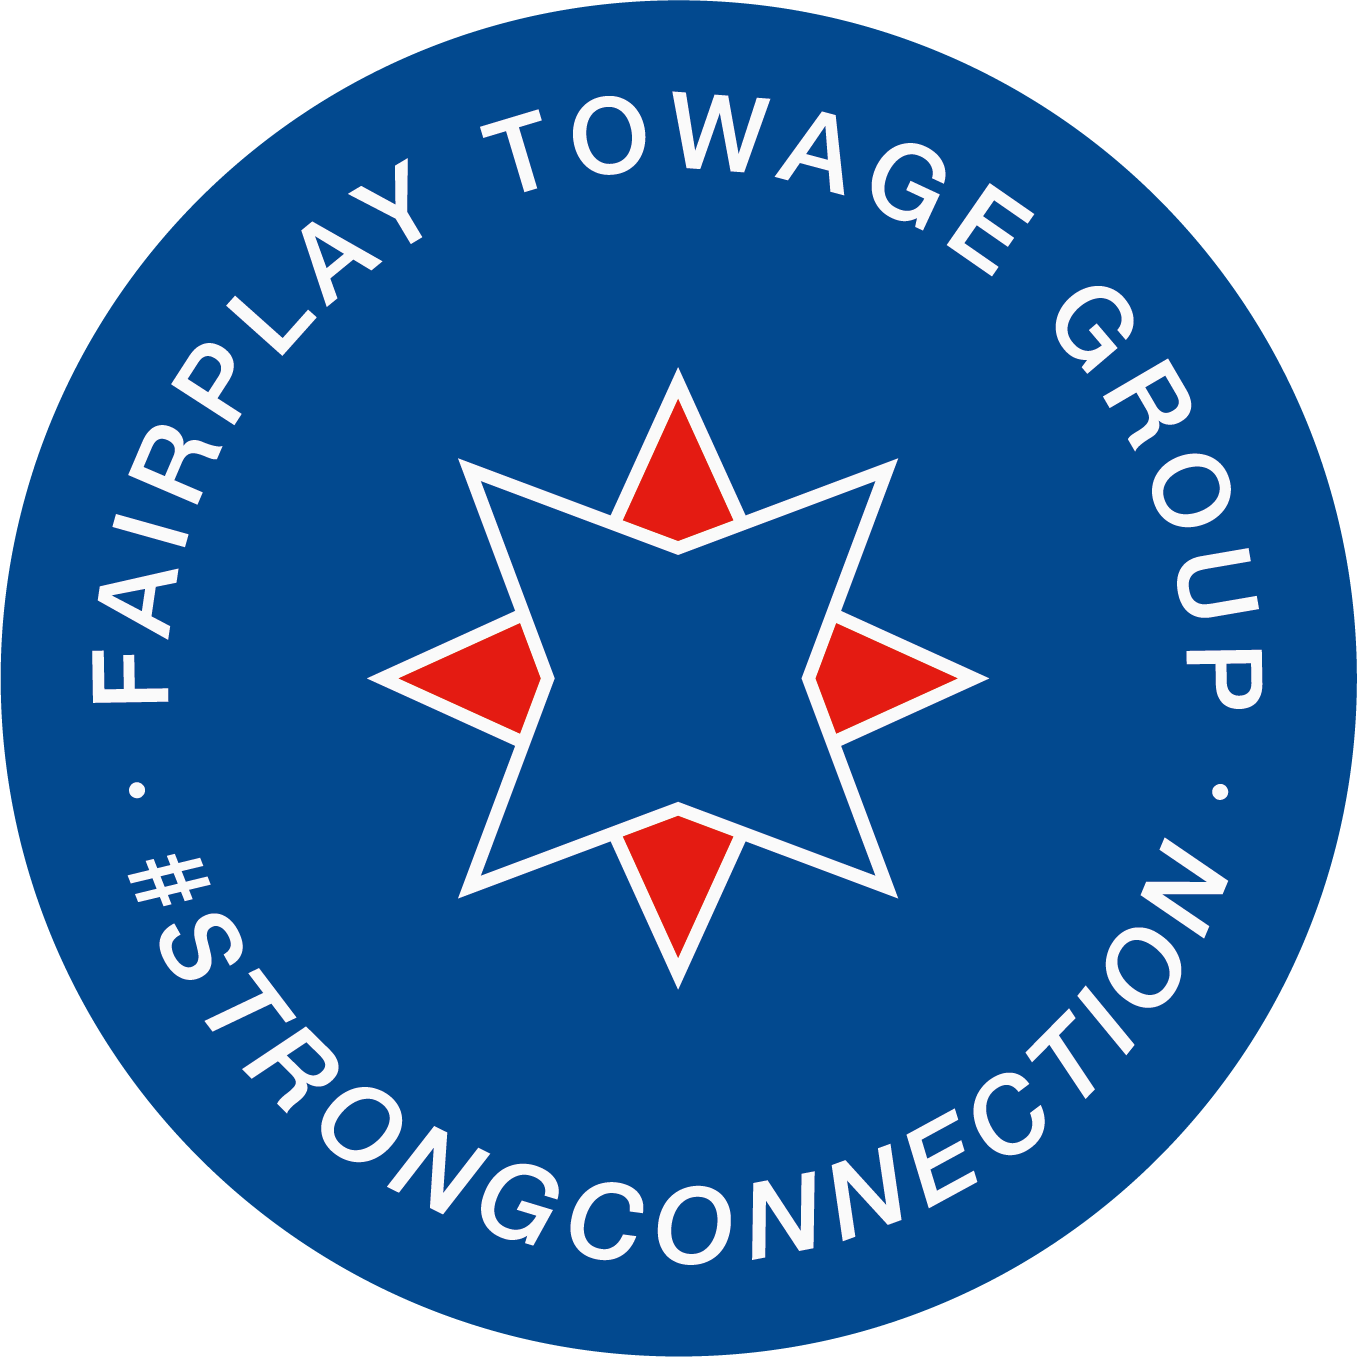 Fairplay Towage Group # STRONG CONNECTION